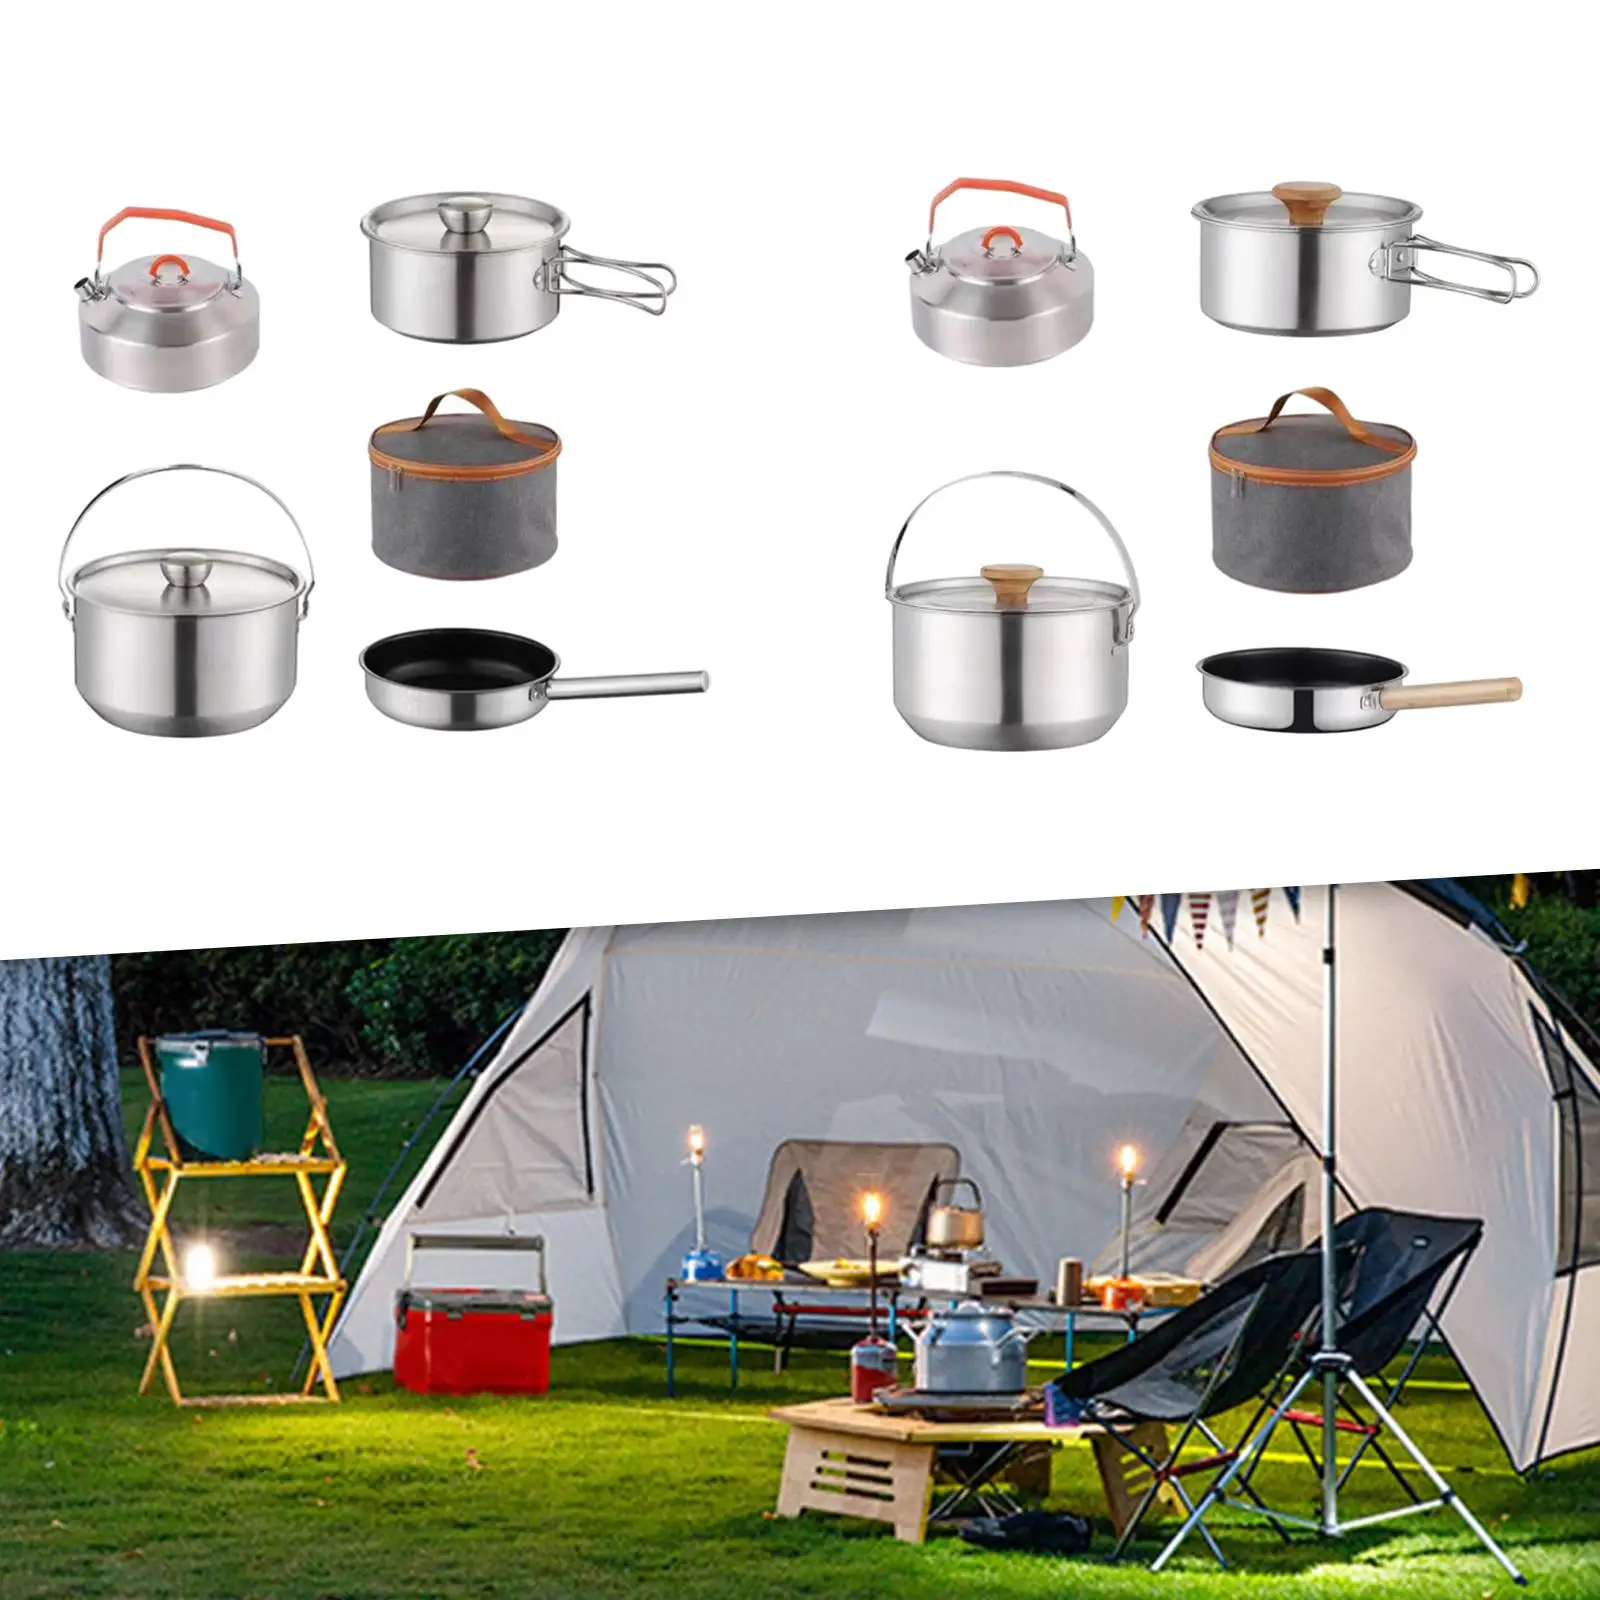 Camping Cookware Kit Cooking Set Tableware Hanging Pot Nonstick Cookset with Kettle for Dinner Hiking Travel Fishing Indoors